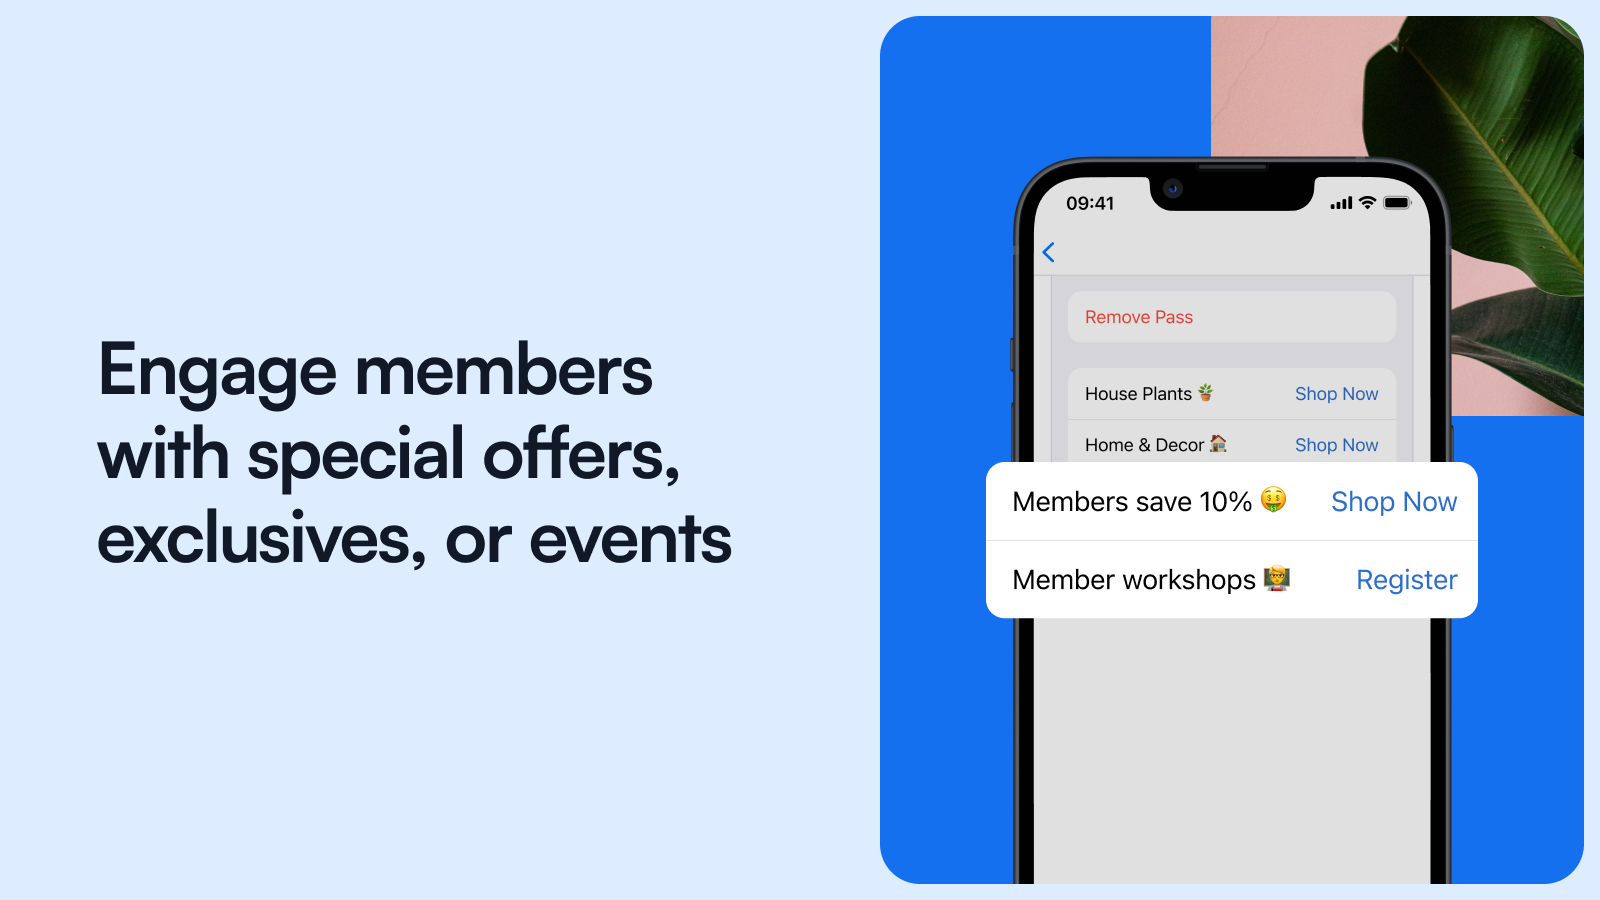 Engage members with special offers, exclusives, or events